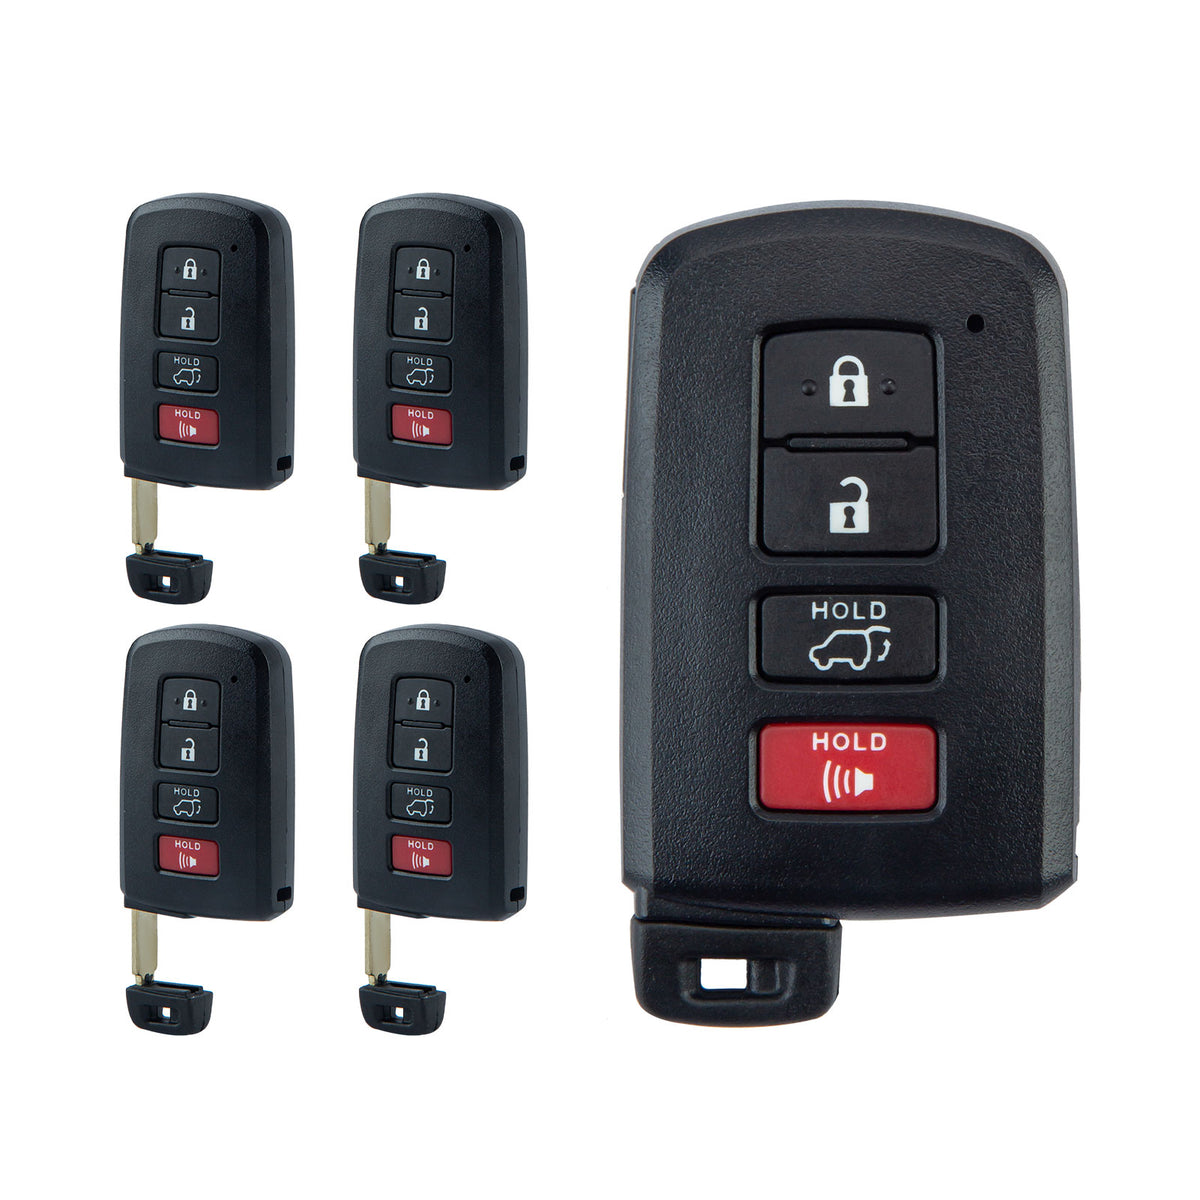 New Remote Key Fob 4 BTN Replacement for 2013-2018 Toyota RAV4 with FCC ID: HYQ14FBA (281451-0020) Keyless Entry Uncut Transponder